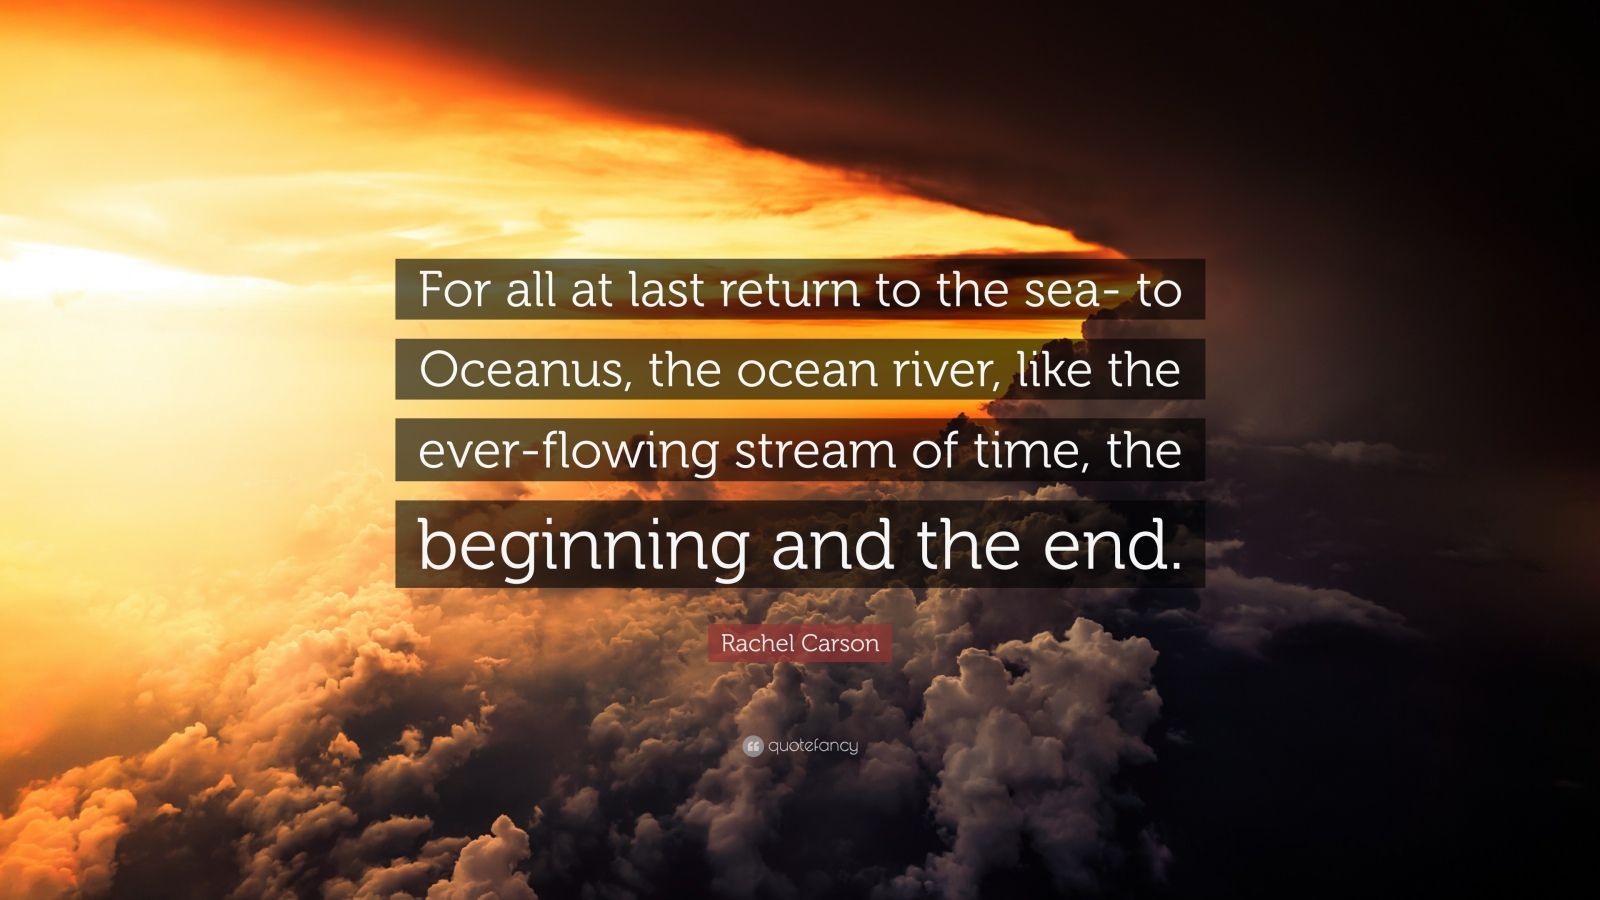 Rachel Carson Quote “For all at last return to the sea